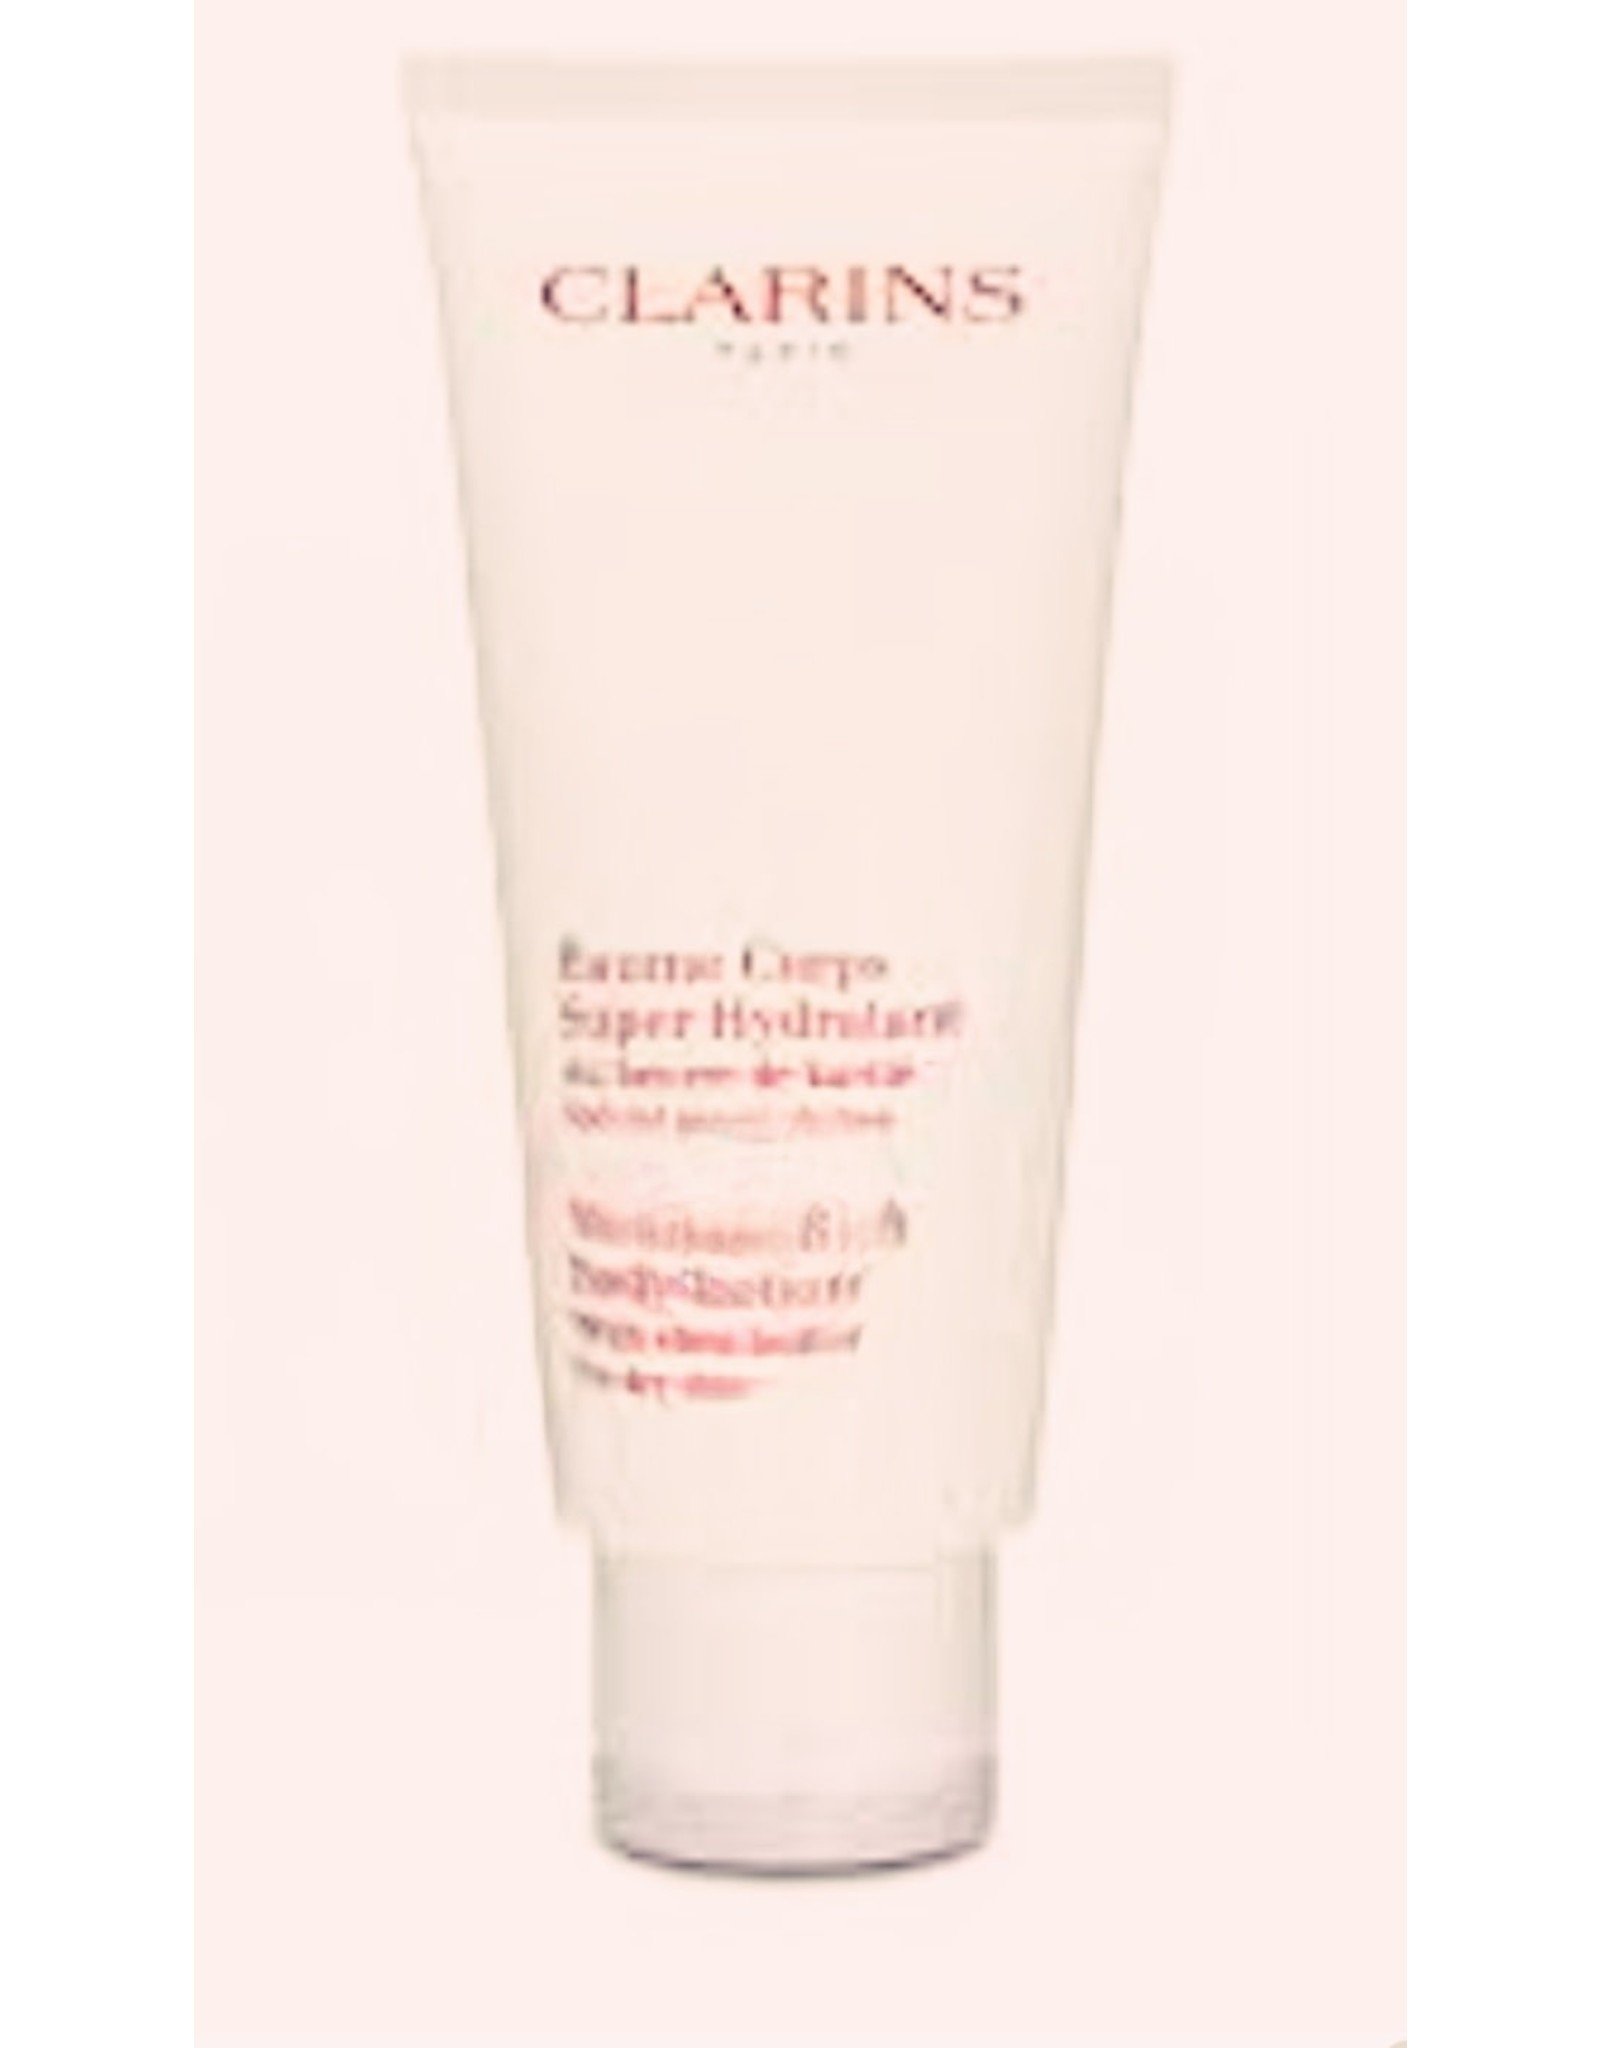 Clarins Clarins moisture rich  body  lotion  3 packs  together